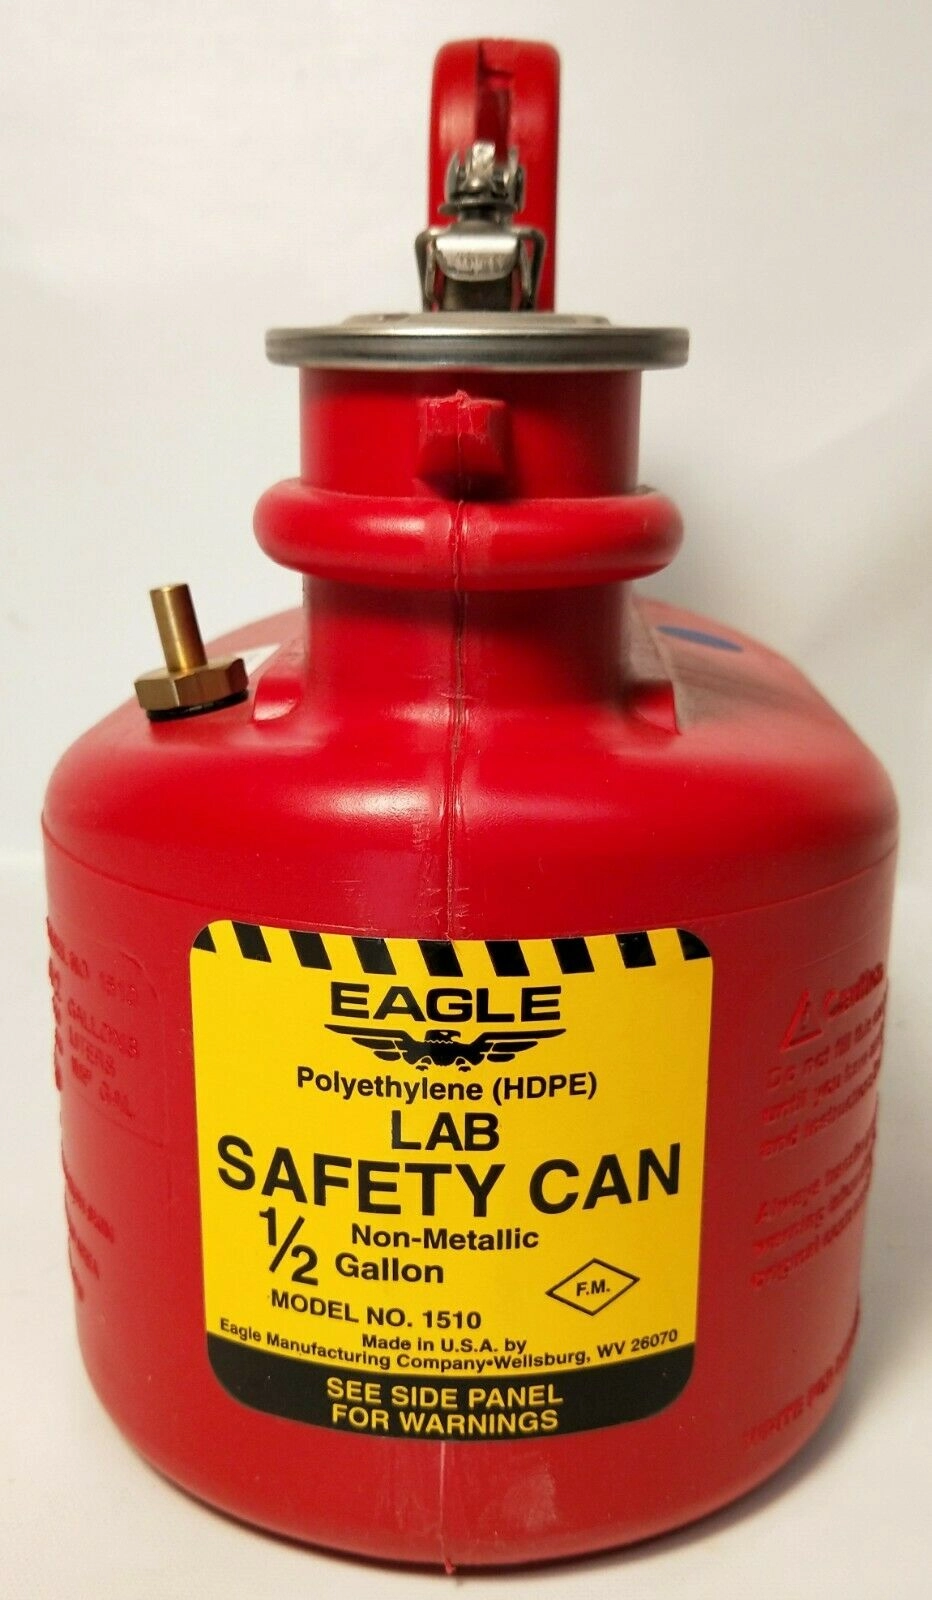 Eagle 1510 Lab Safety Can - 1/2 Gallon